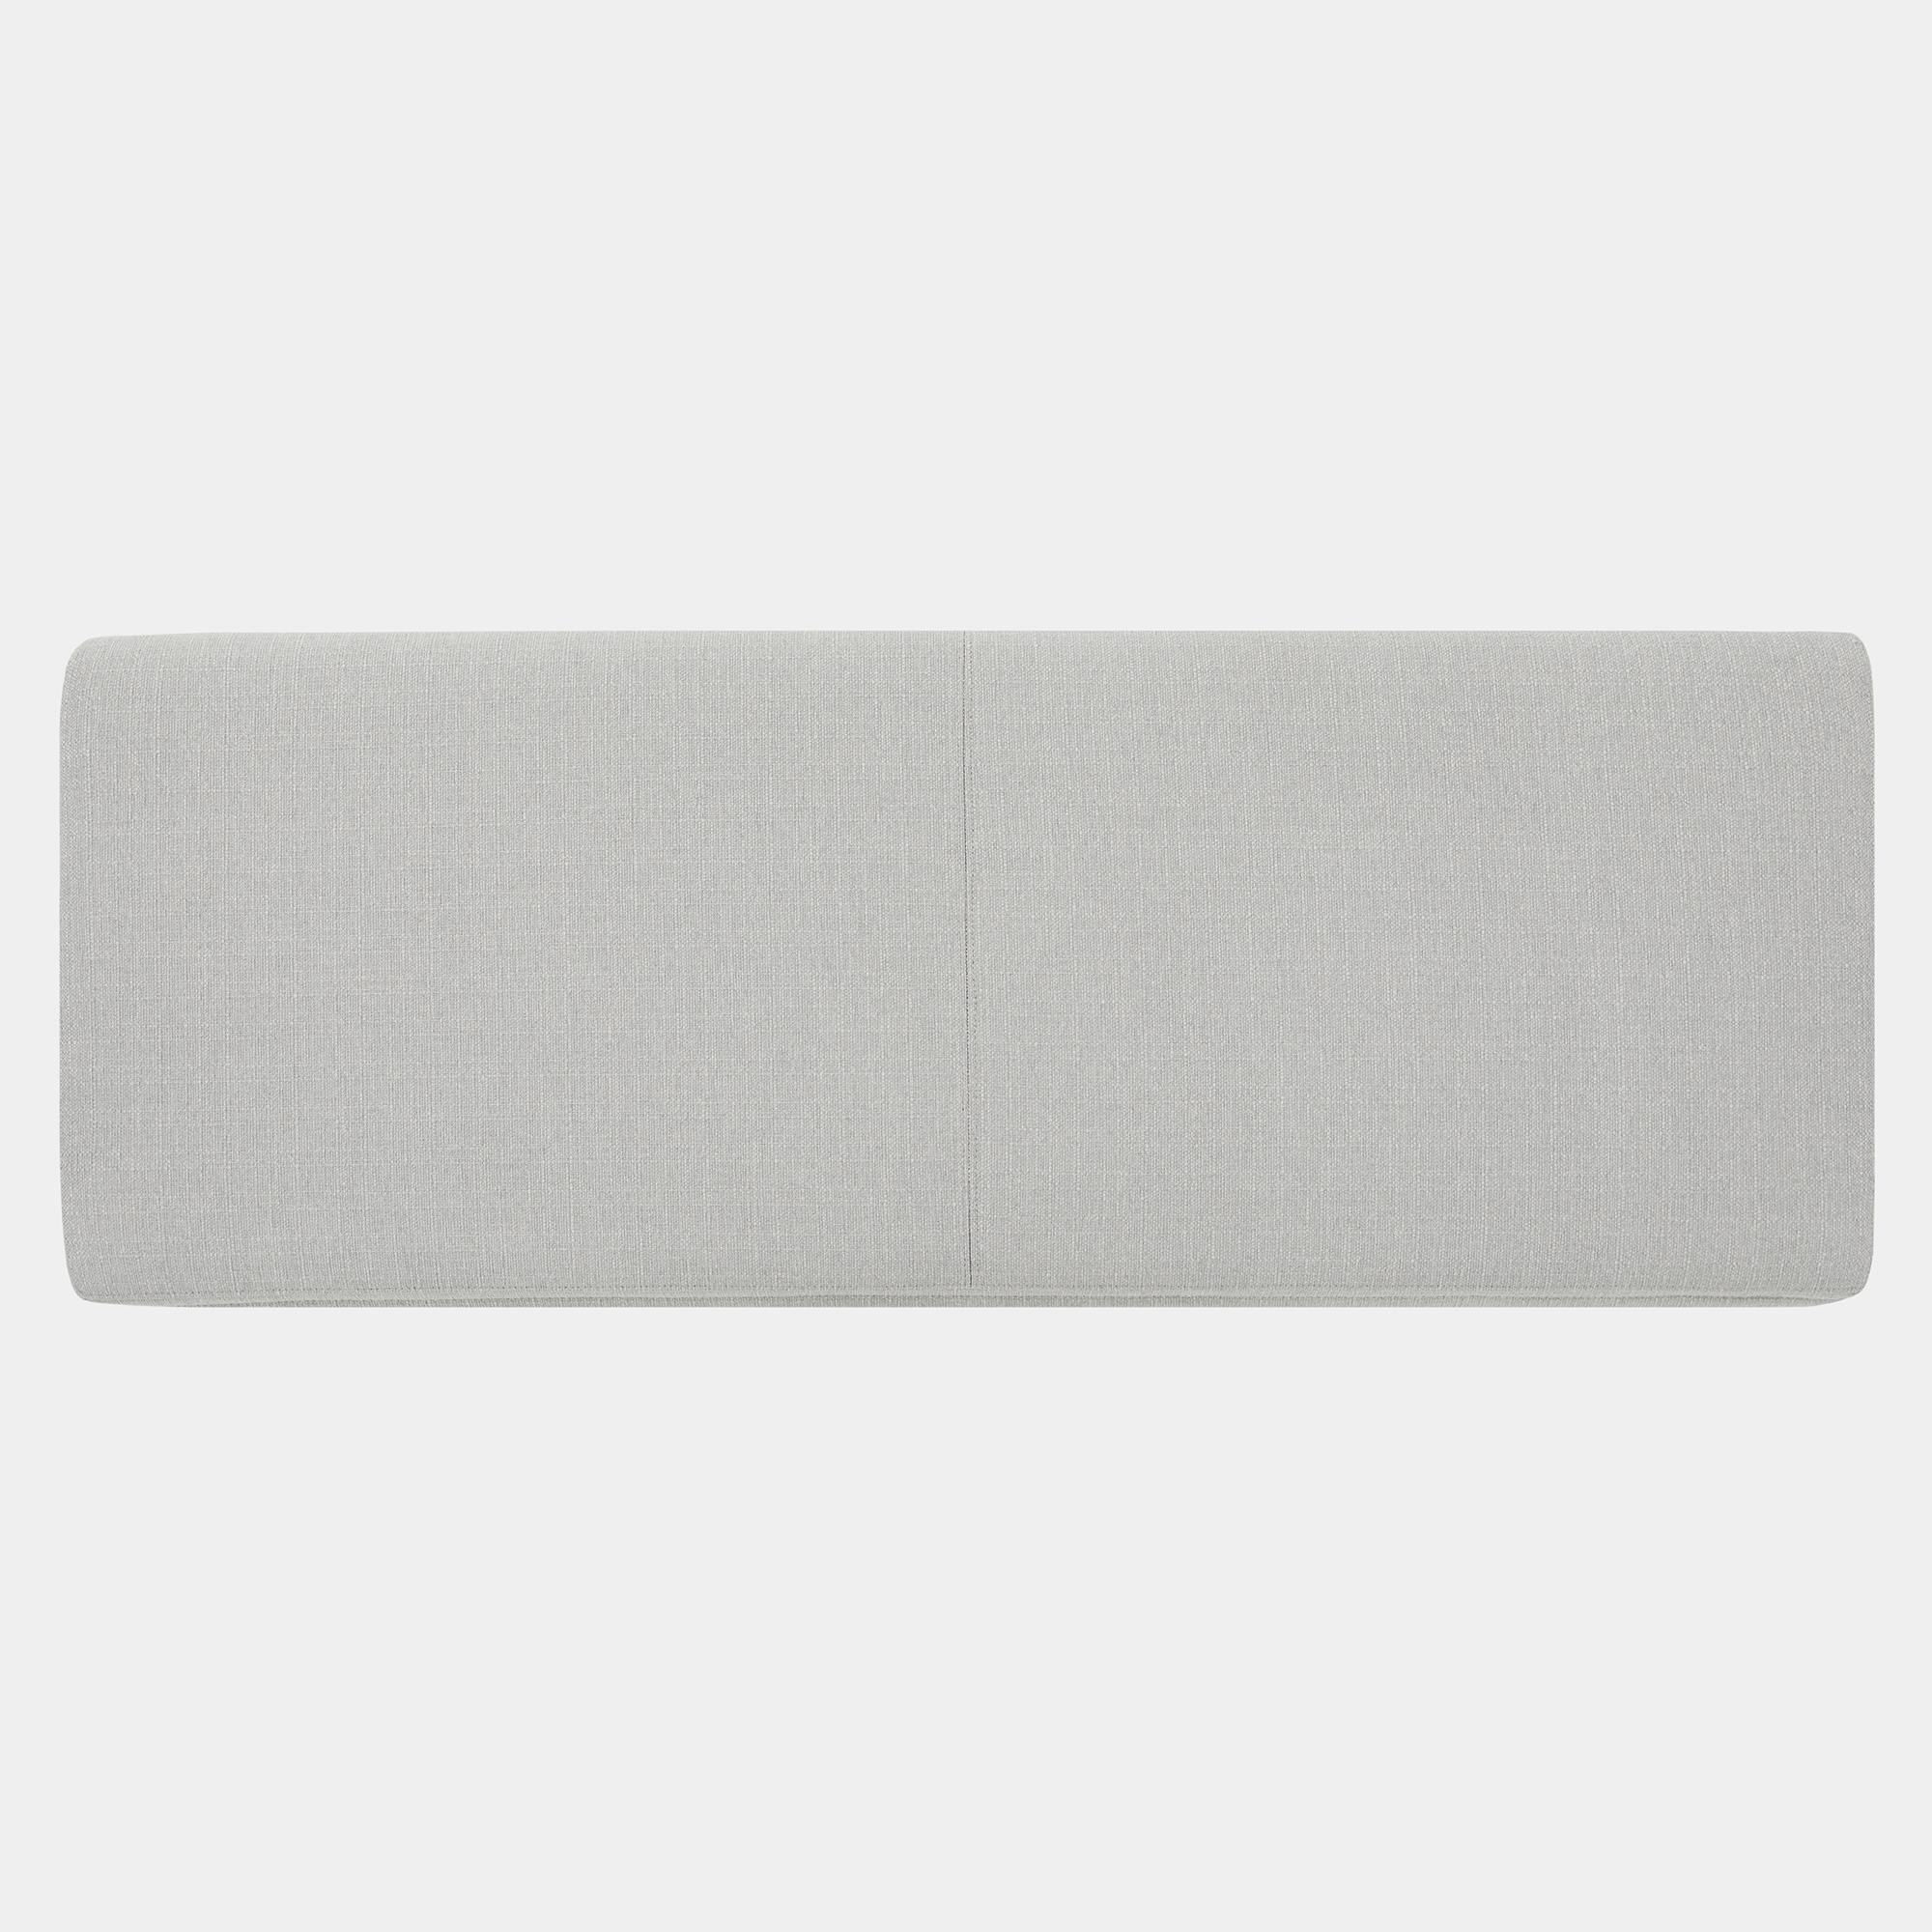 The PillowBoard (Fog Grey) - 1:1 - Front